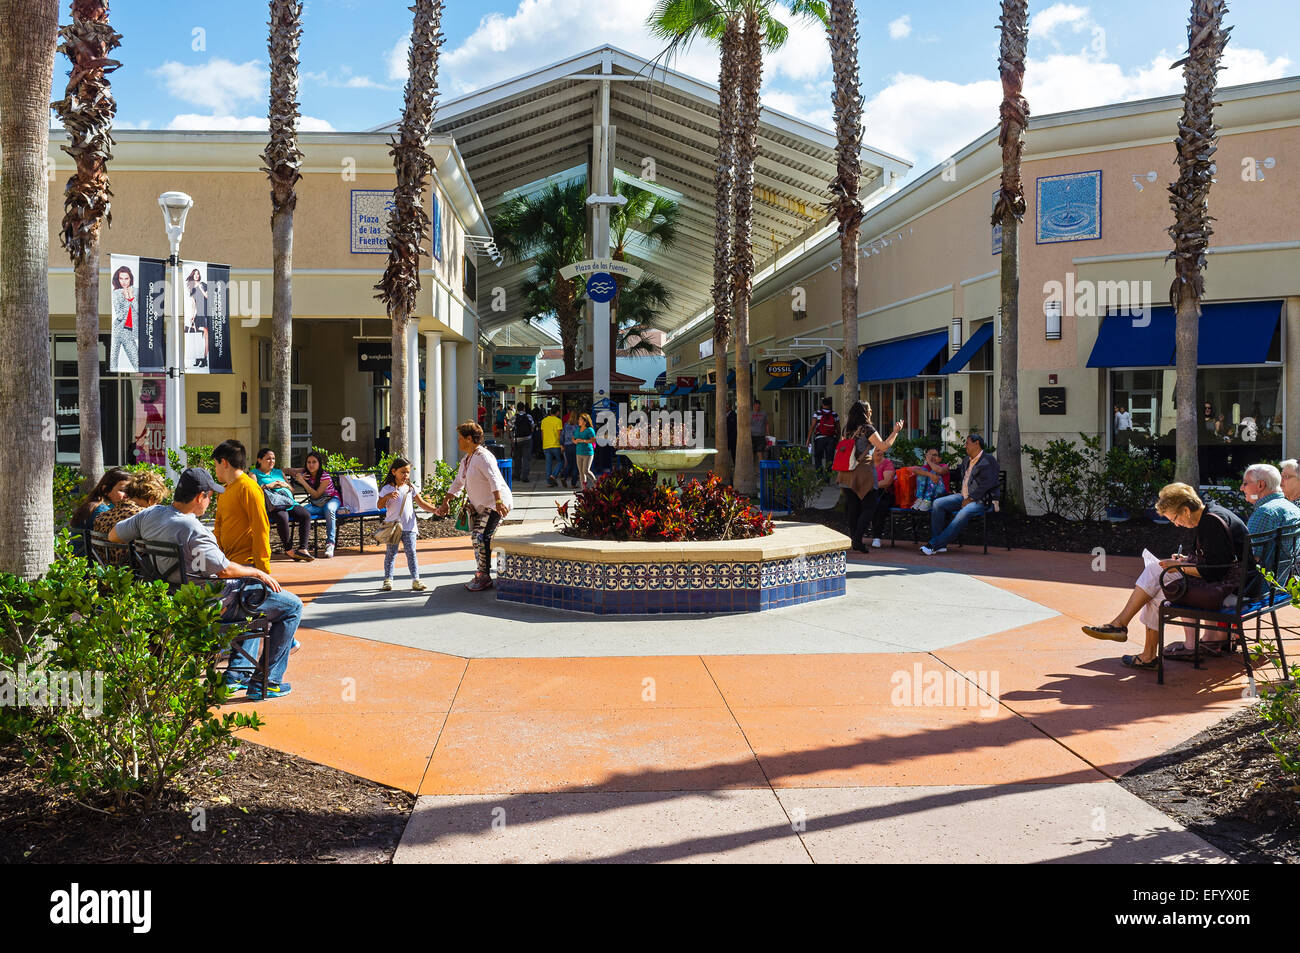 Shoppers outside at the Orlando International Premium Outlets Stock Photo: 78674414 - Alamy